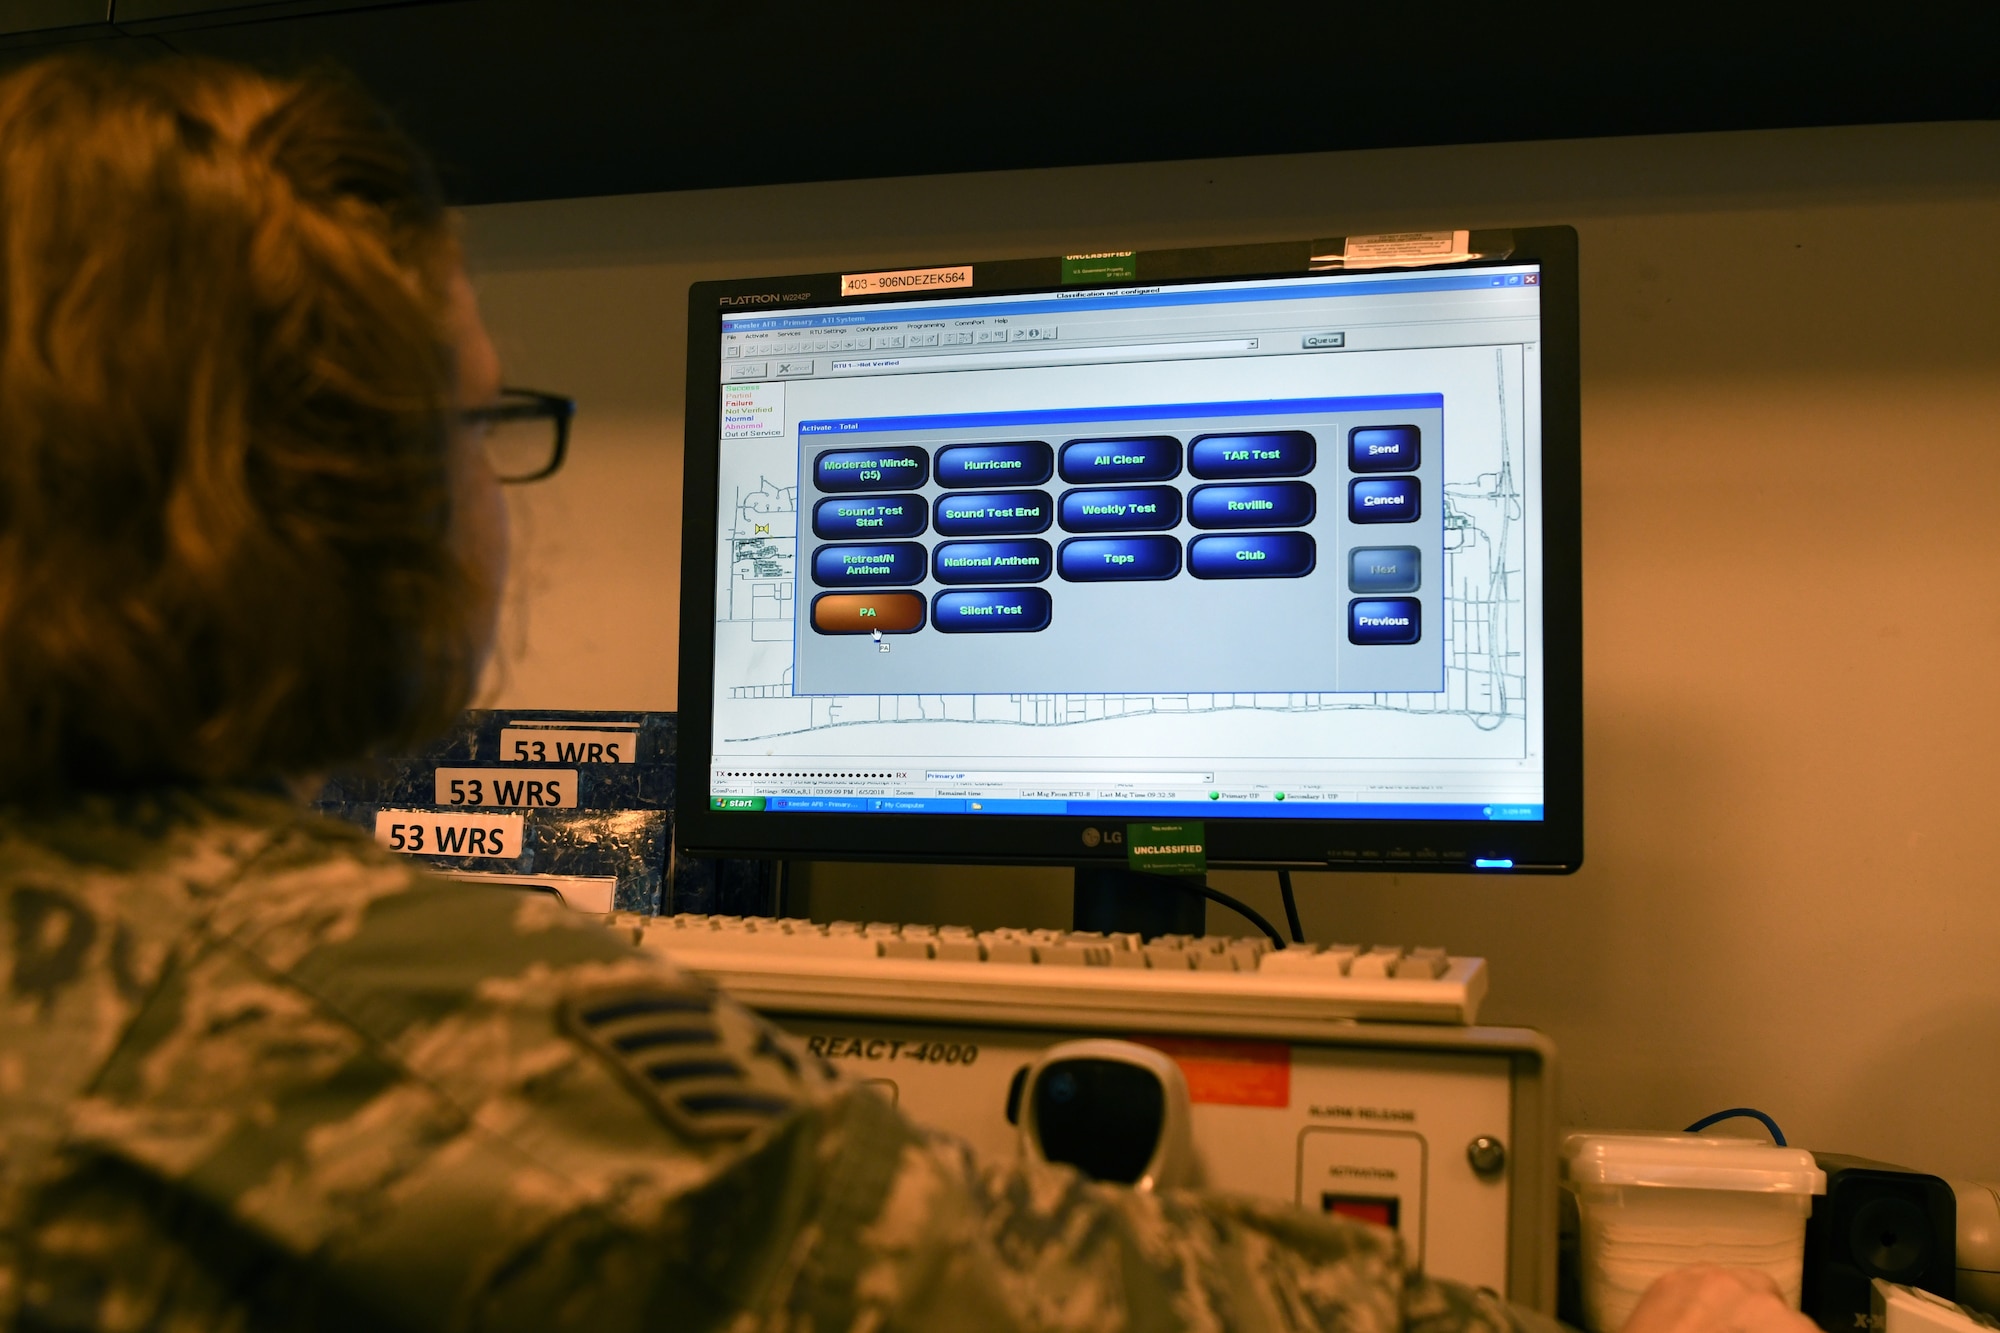 U.S. Air Force Staff Sgt. Kaylee Sprout, 81st Training Wing emergency action controller NCO in charge of systems, looks over the giant voice, an emergency notification system, in the command post at Keesler Air Force Base, Mississippi, June 5, 2018. Emergency action controllers are responsible for receiving and disseminating information during emergencies. (U.S. Air Force photo by Airman 1st Class Suzie Plotnikov)